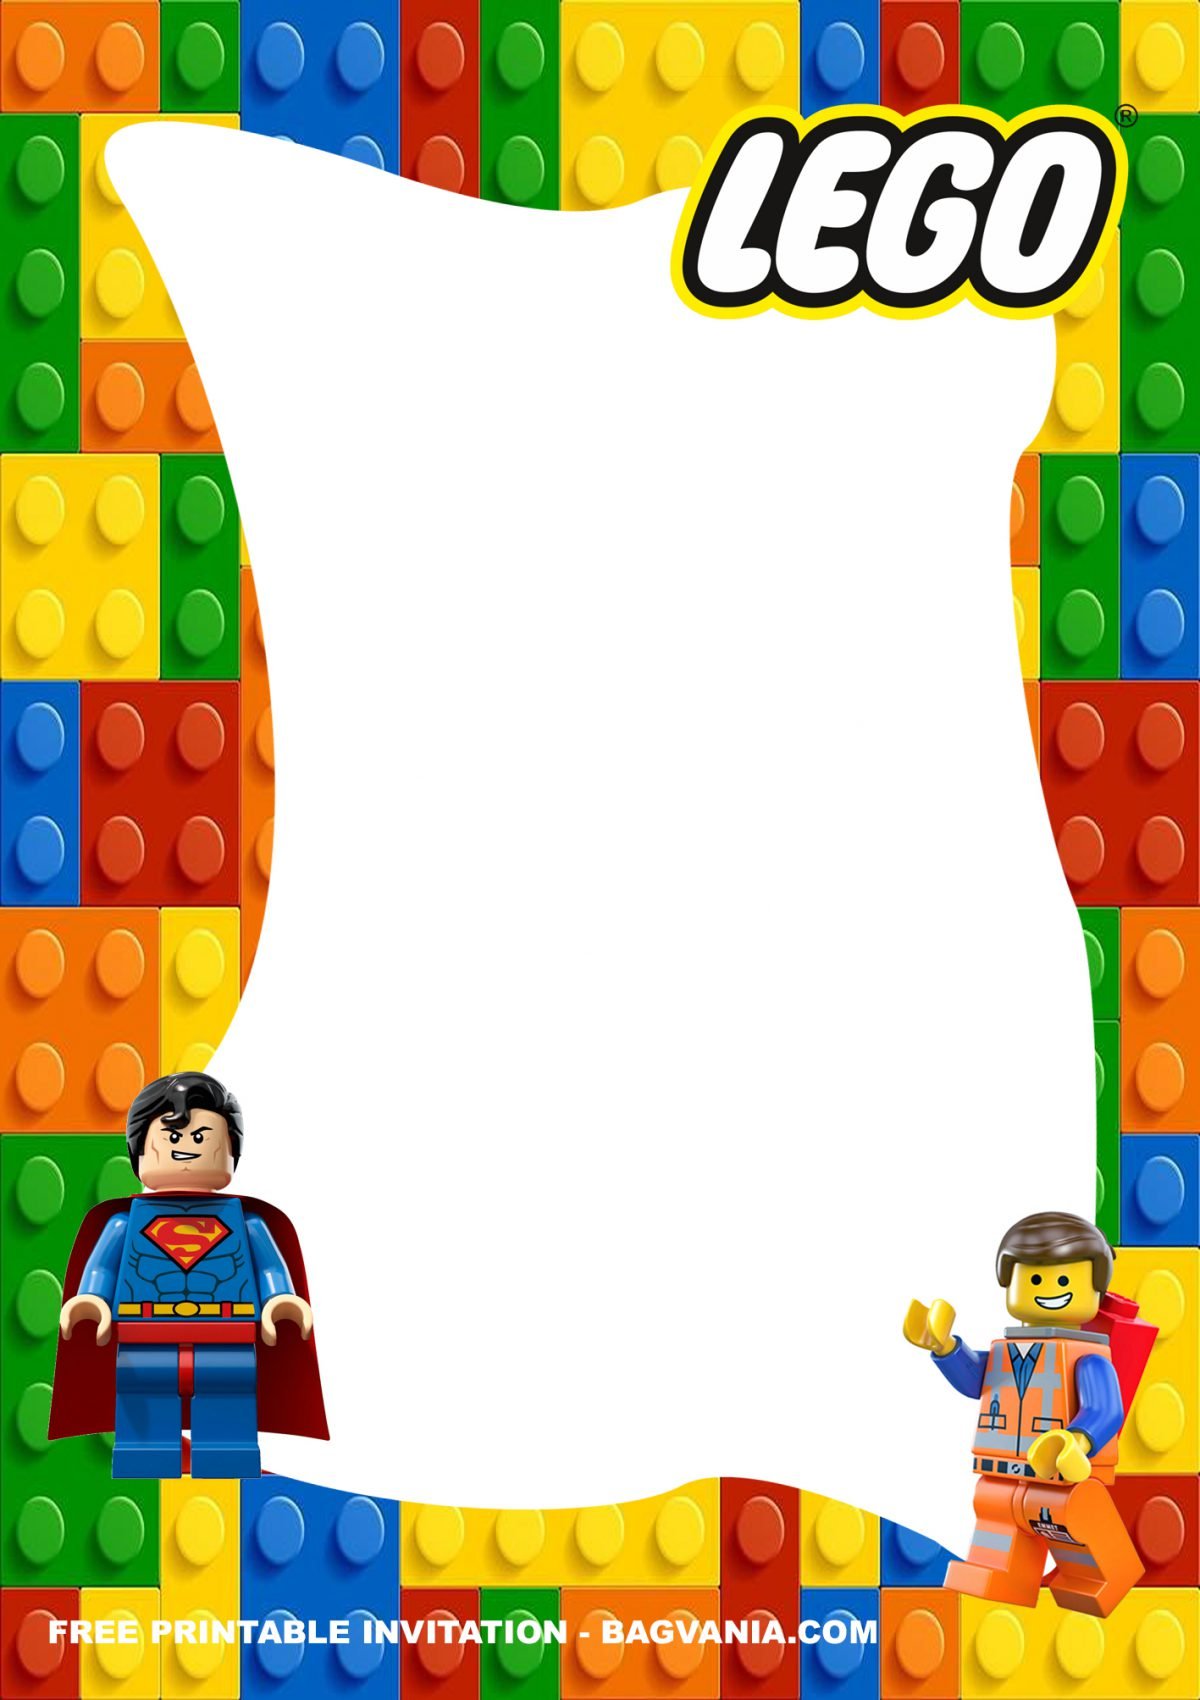 Free Printable Lego Superheroes Birthday Invitation Templates With Superman and Construction Worker Mini-figures